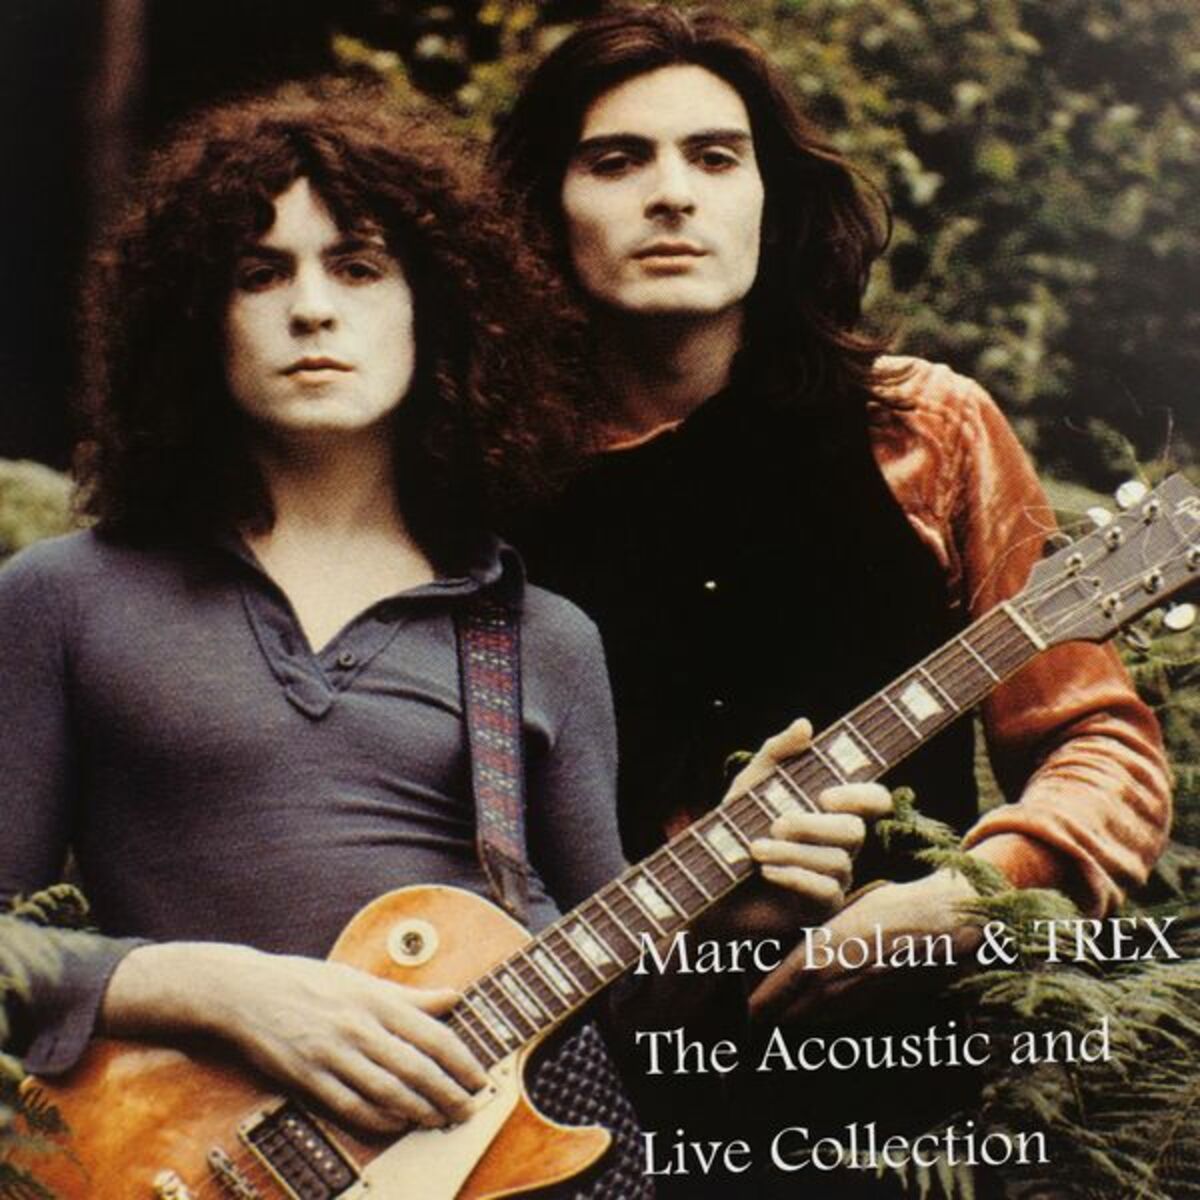 T. Rex - Marc Bolan u0026 Trex (The Acoustic and Live Collection): lyrics and  songs | Deezer